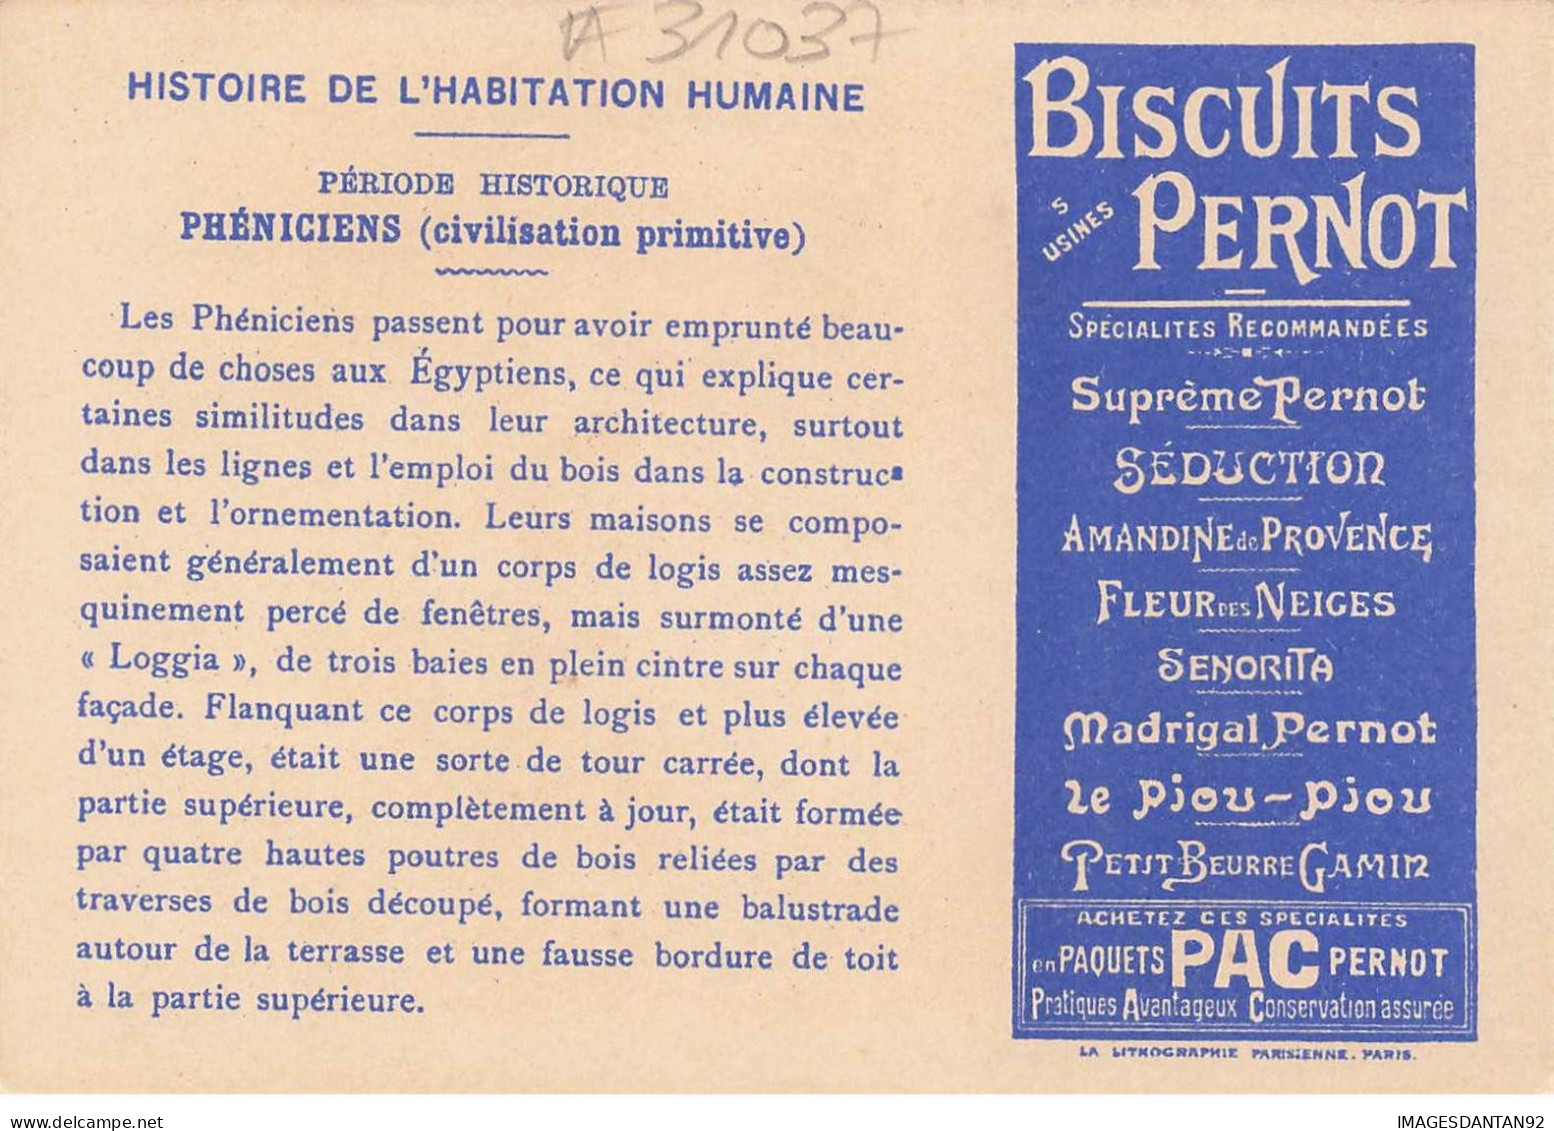 CHROMO #CL31037 BISCUITS PERNOT HABITATION TRADITIONNELLE PHENICIENS - Pernot